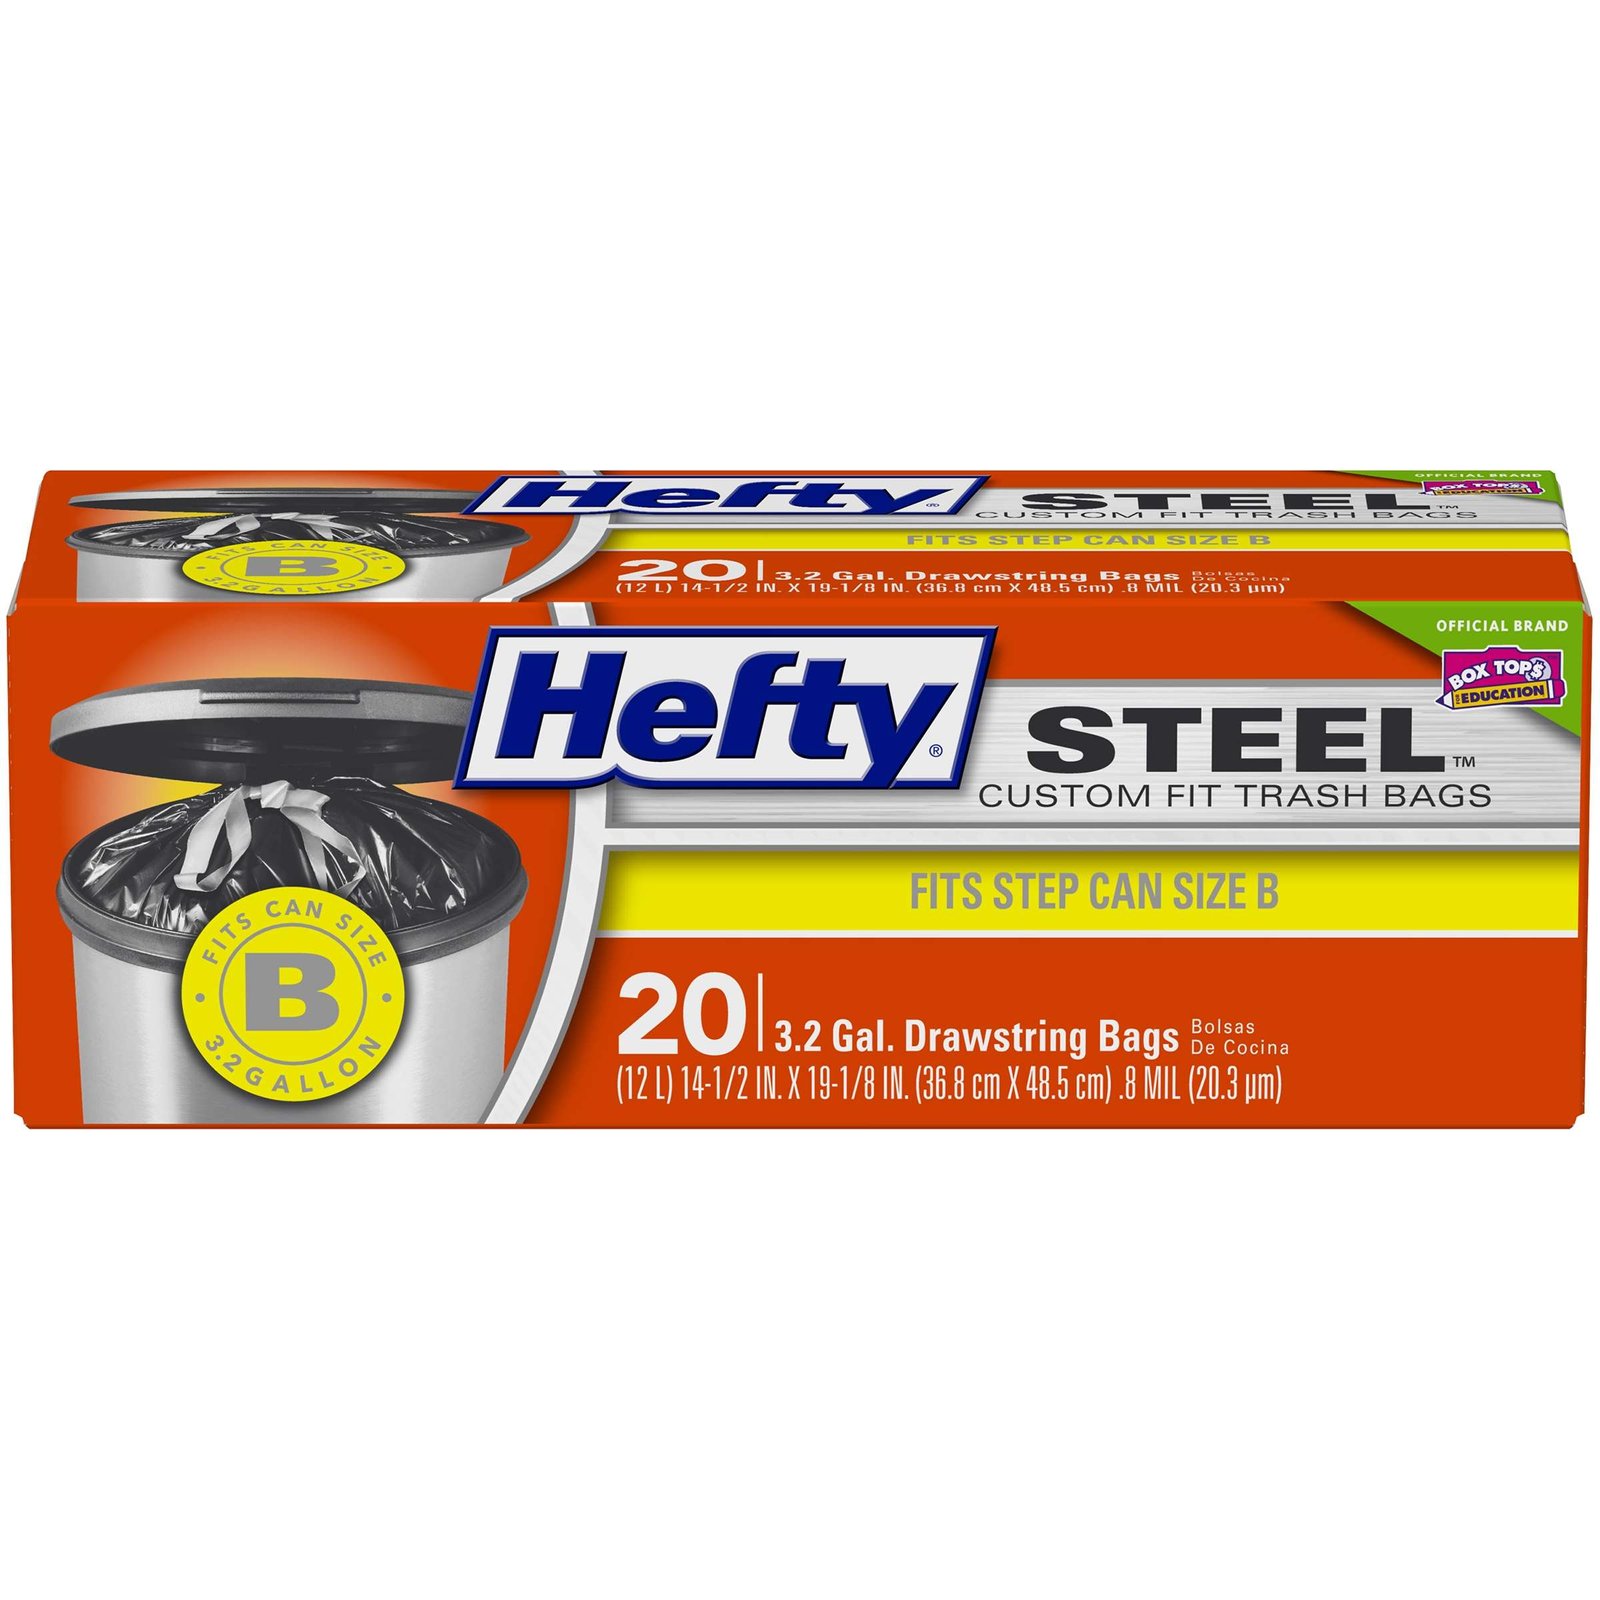 Hefty Steel Custom Fit B Size Drawstring Trash Bags, Black, Unscented, 3.2  Gallon, 20 Count - Dover Mart